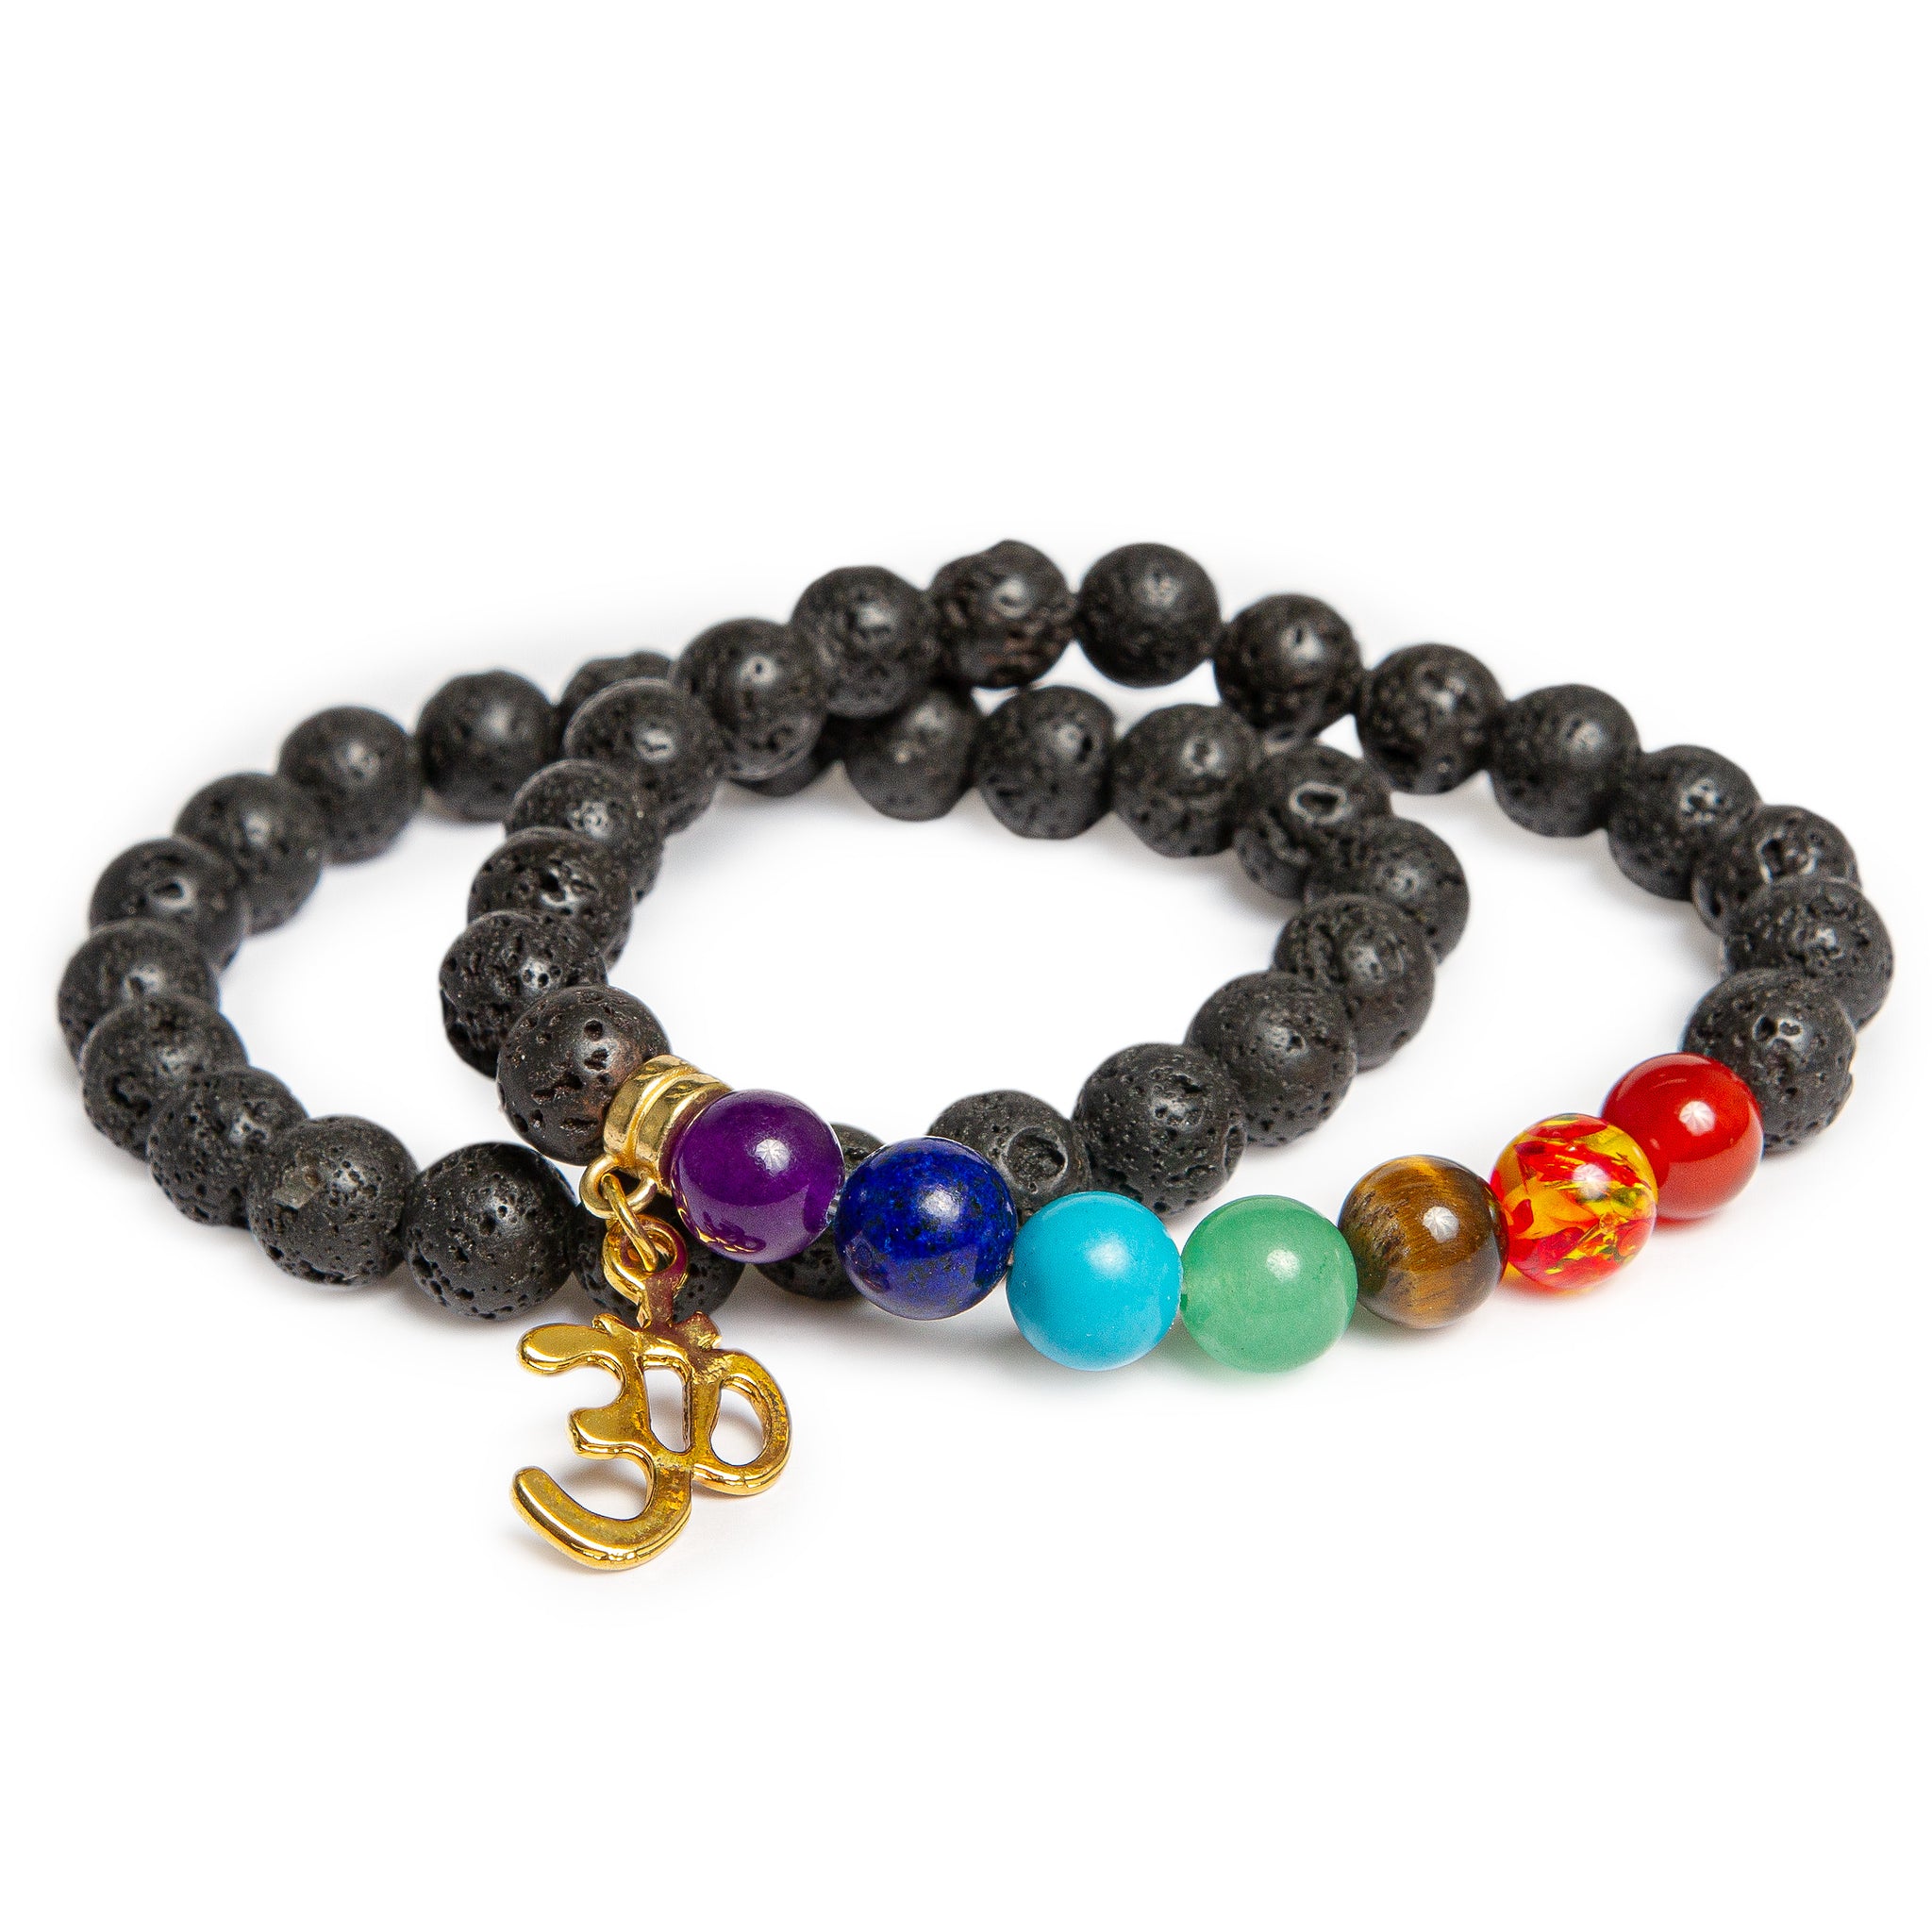 Black Natural Lava Stretch Bracelet with Chakra Quartz - The Stone of Strength, Grounding and Protection